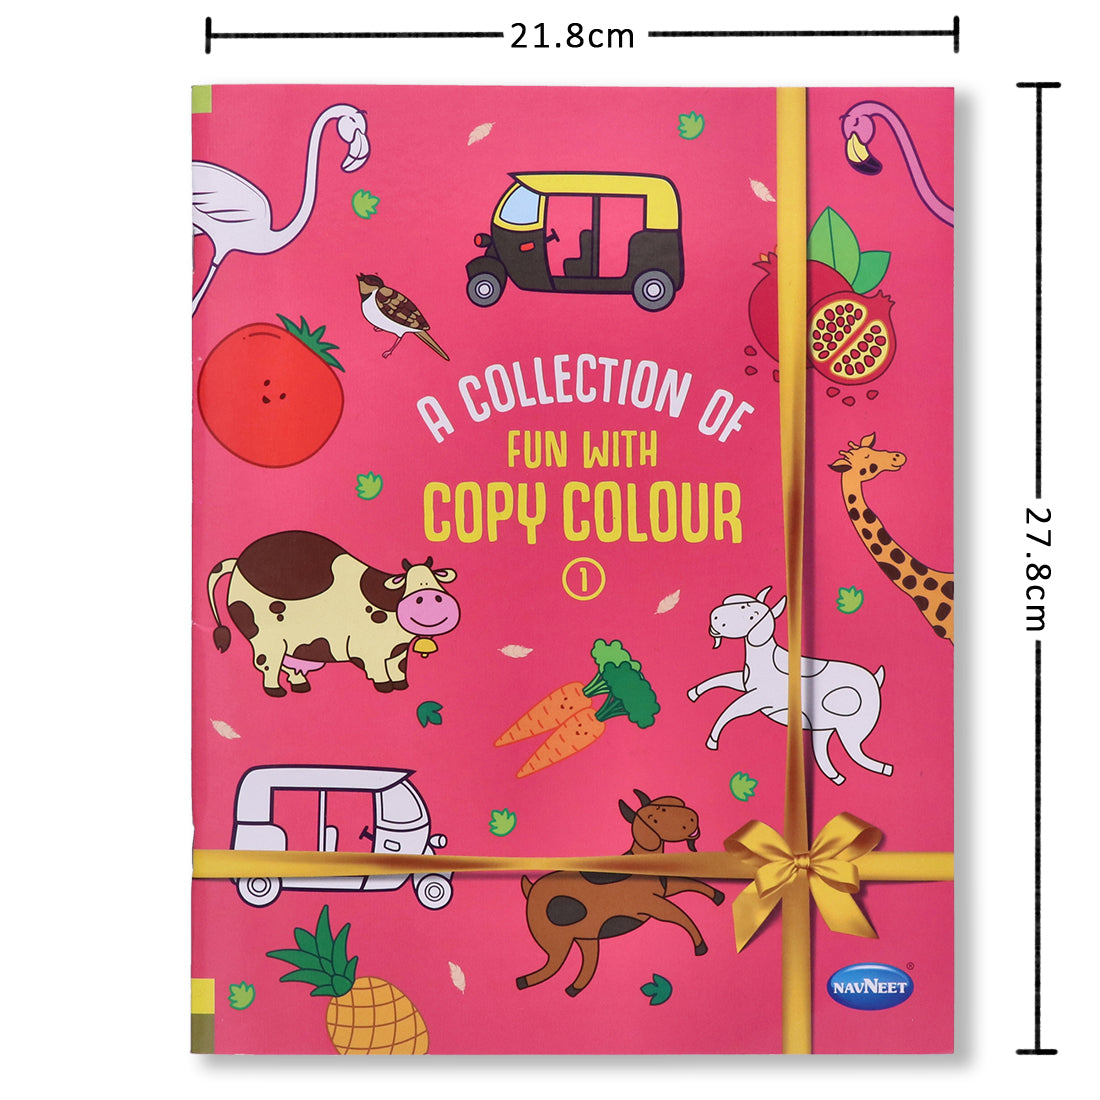 Navneet A Collection Of Fun With Copy Colour Book- Theme: Vehicles, Fruits, Vegetables, Wild & Domestic animals, Birds - big pictures - painting books for kids - set of 3 books